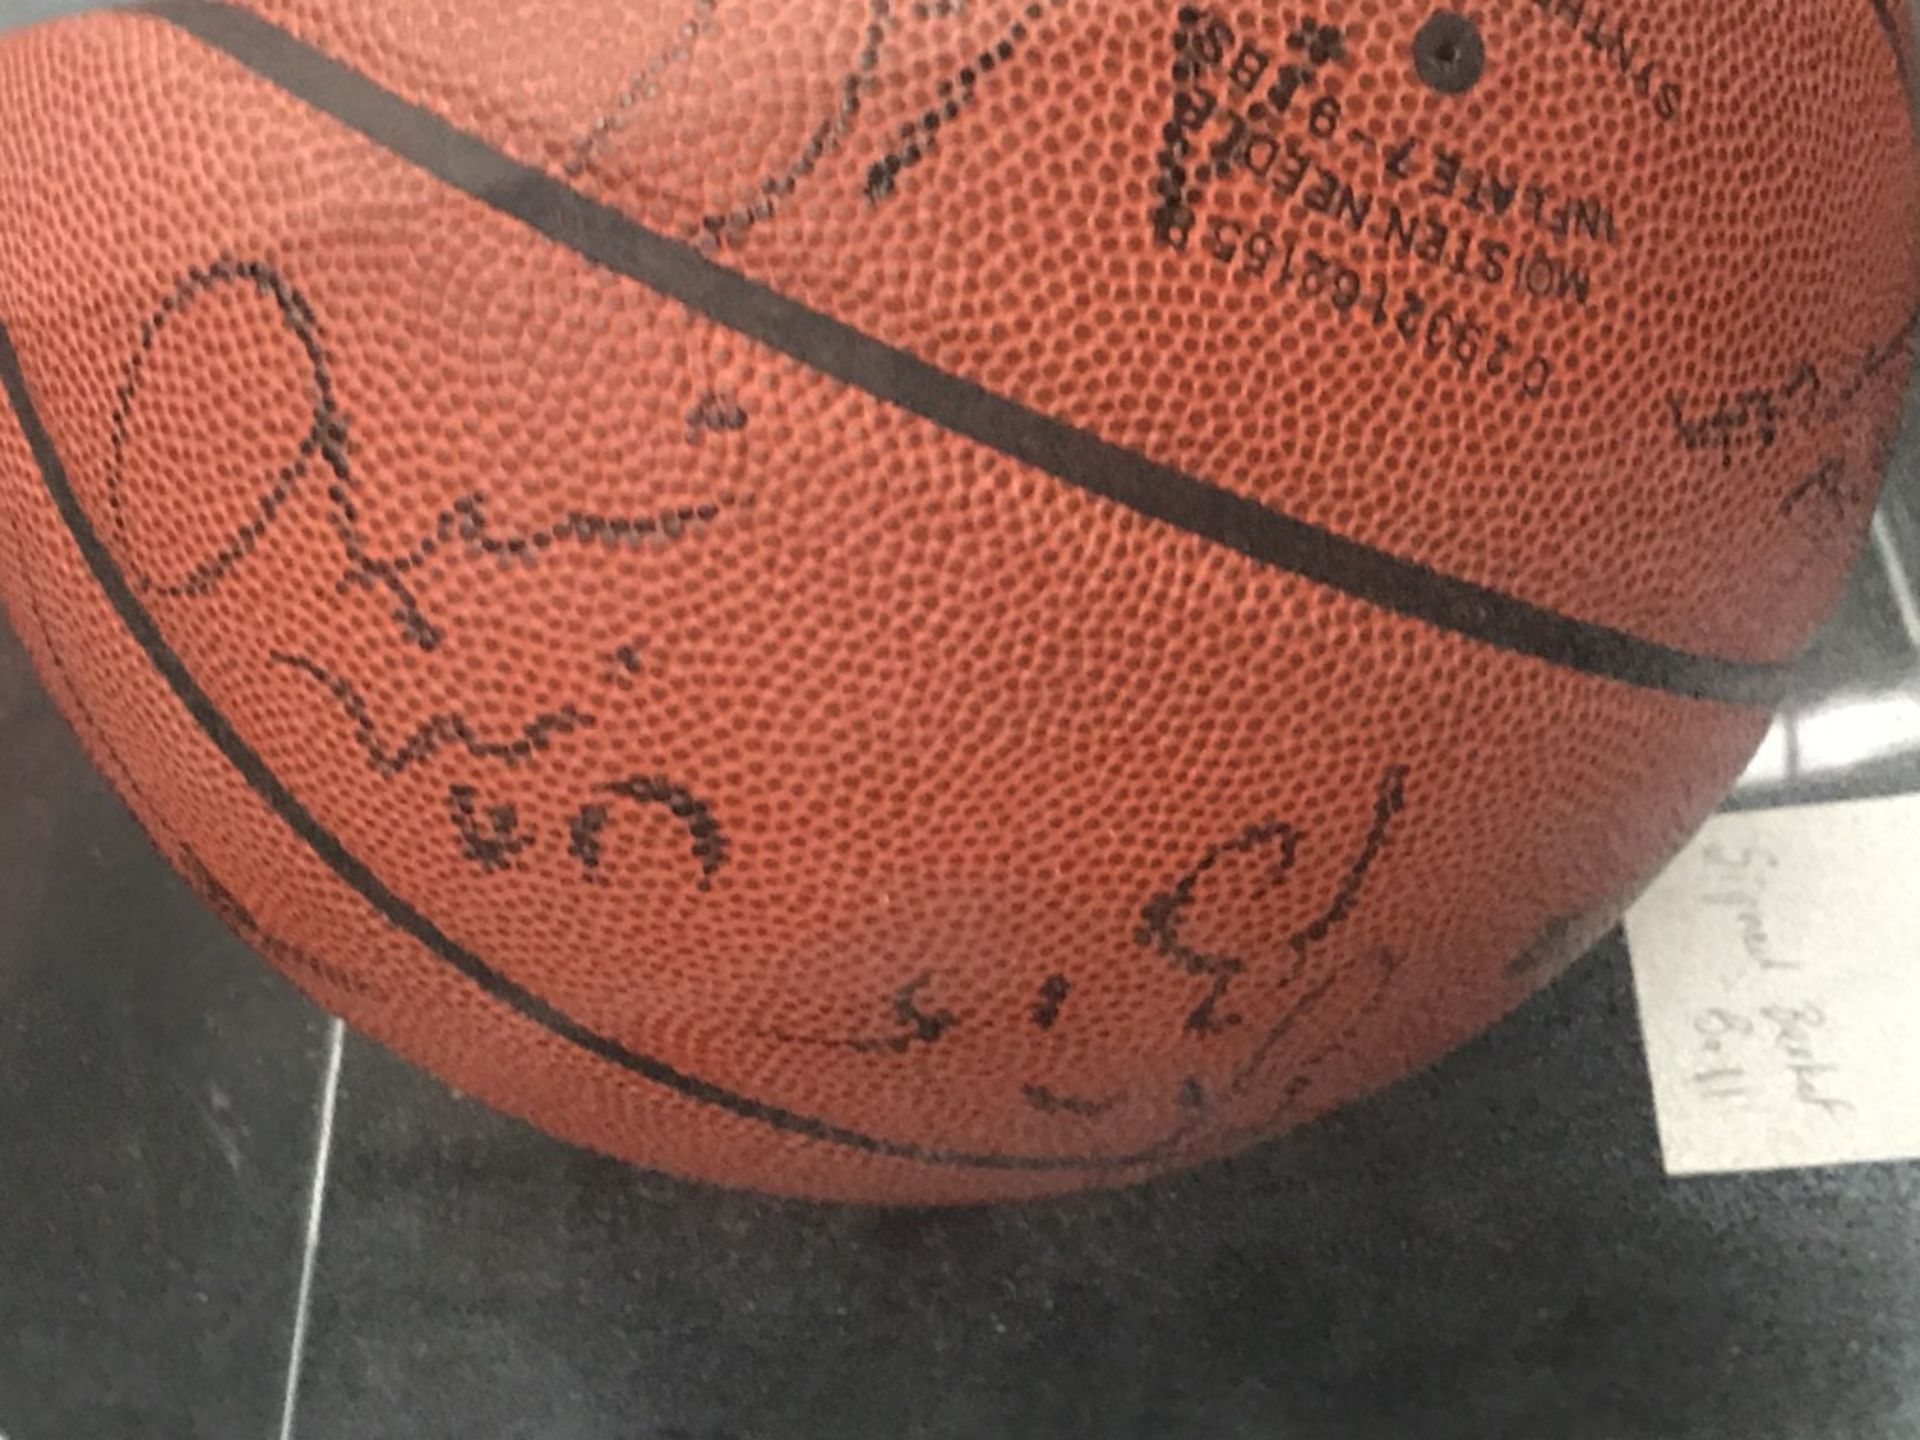 Basketball Signed by Rockets Team - Image 6 of 10